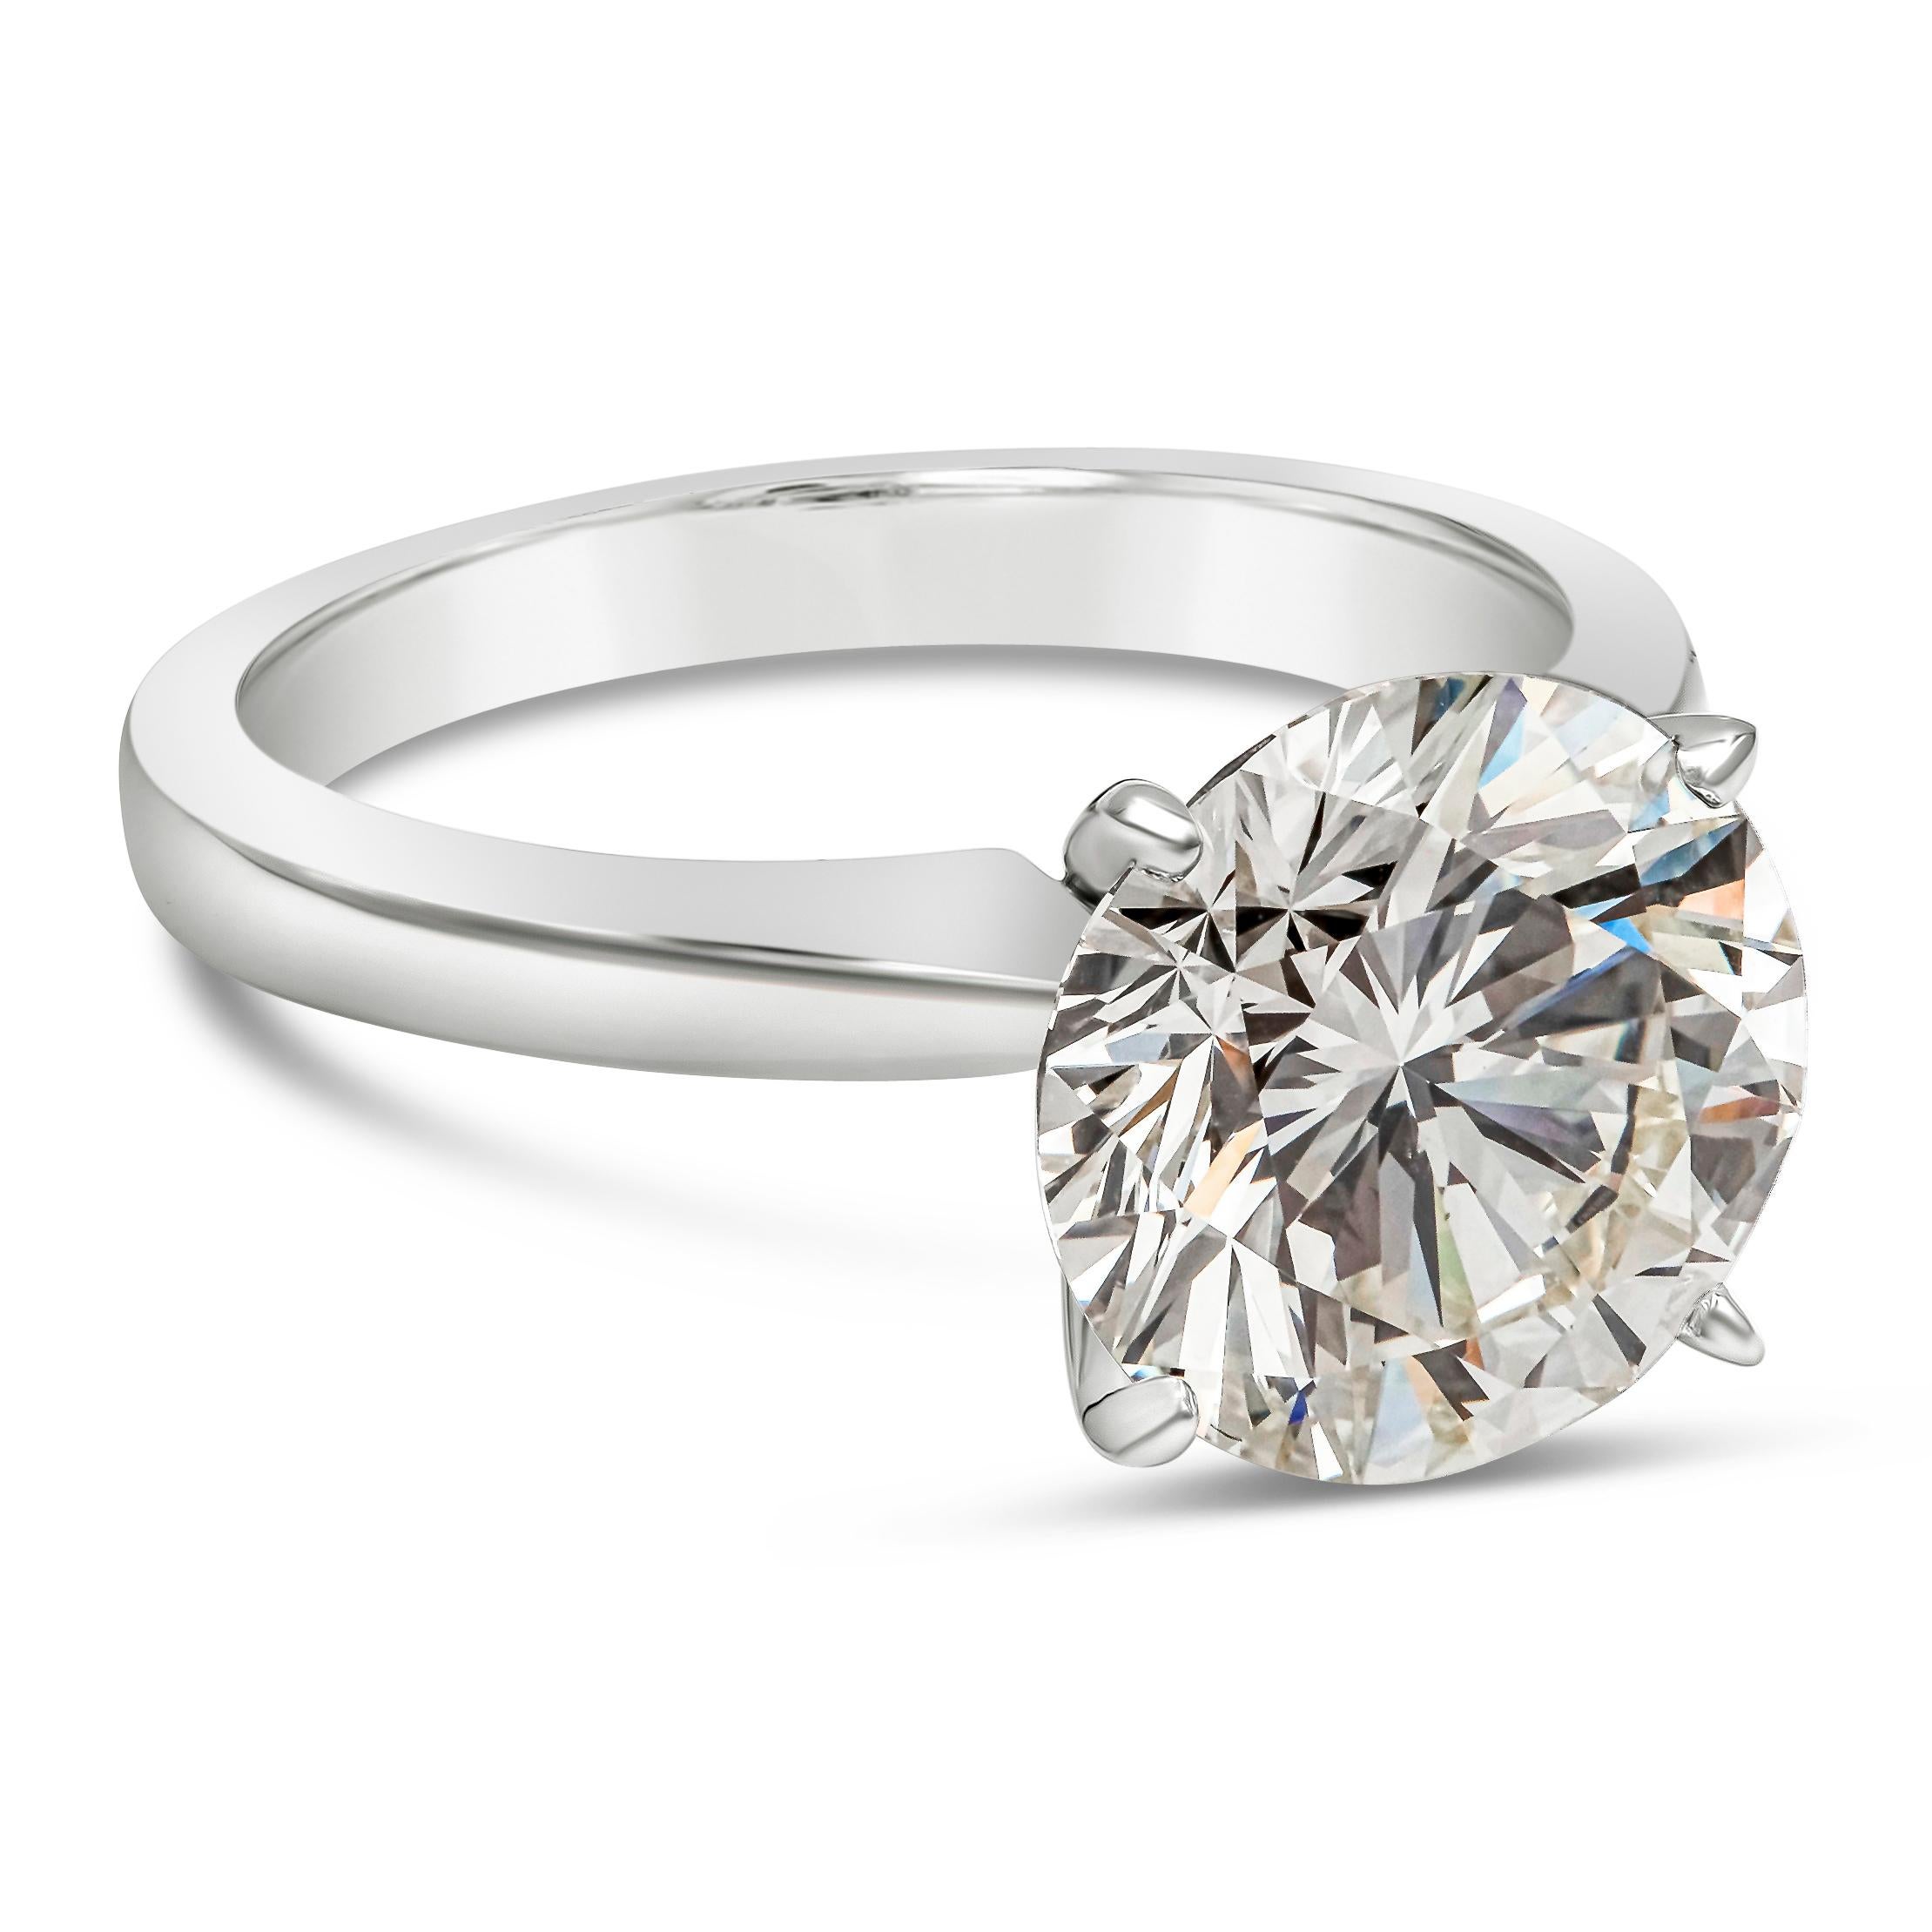 An elegant and classic solitaire engagement ring style, showcasing a round brilliant cut diamond weighing 3.68 carats certified by GIA as K color and VS2 clarity, set in a four prong basket setting of 18K white gold. Size 6 US, resizable upon